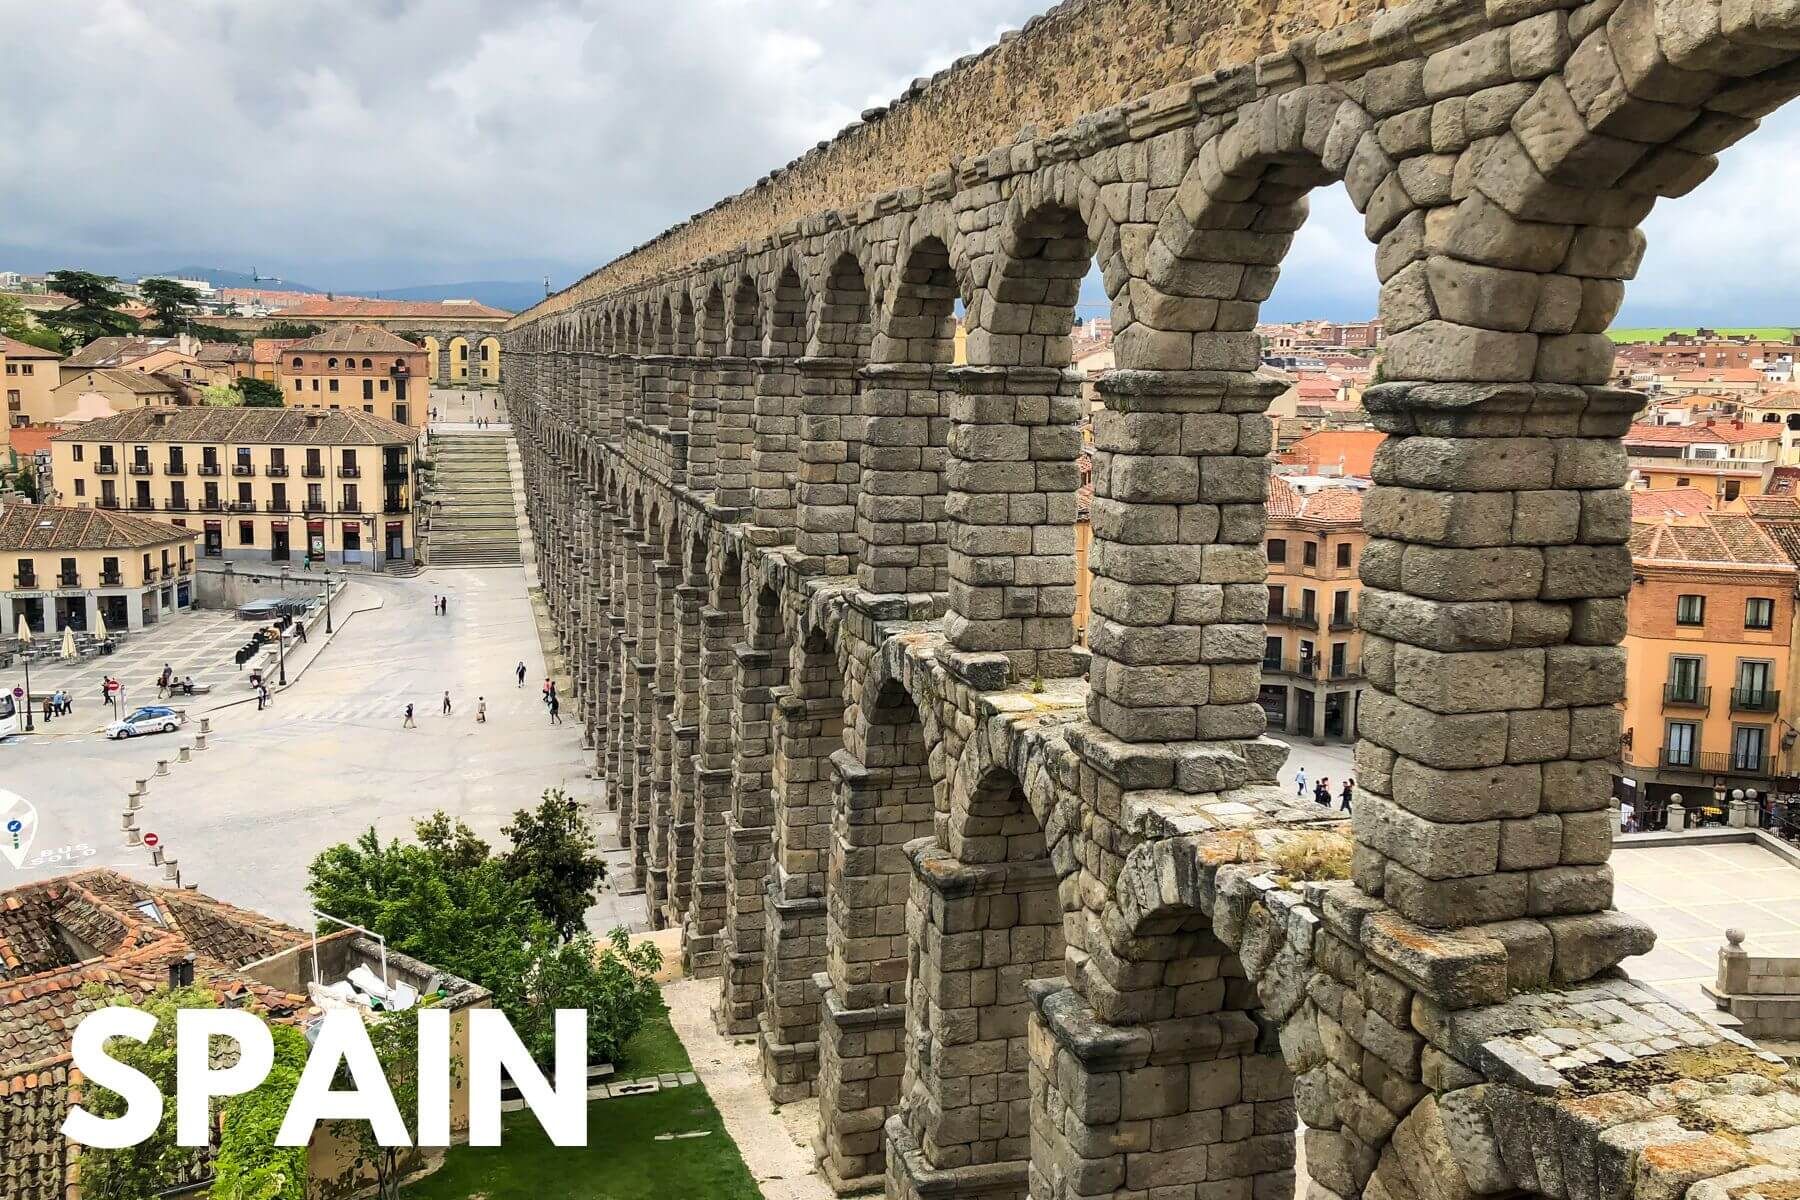 Photo of a stone viaduct running through a small town near Madrid with the word Spain overlaid